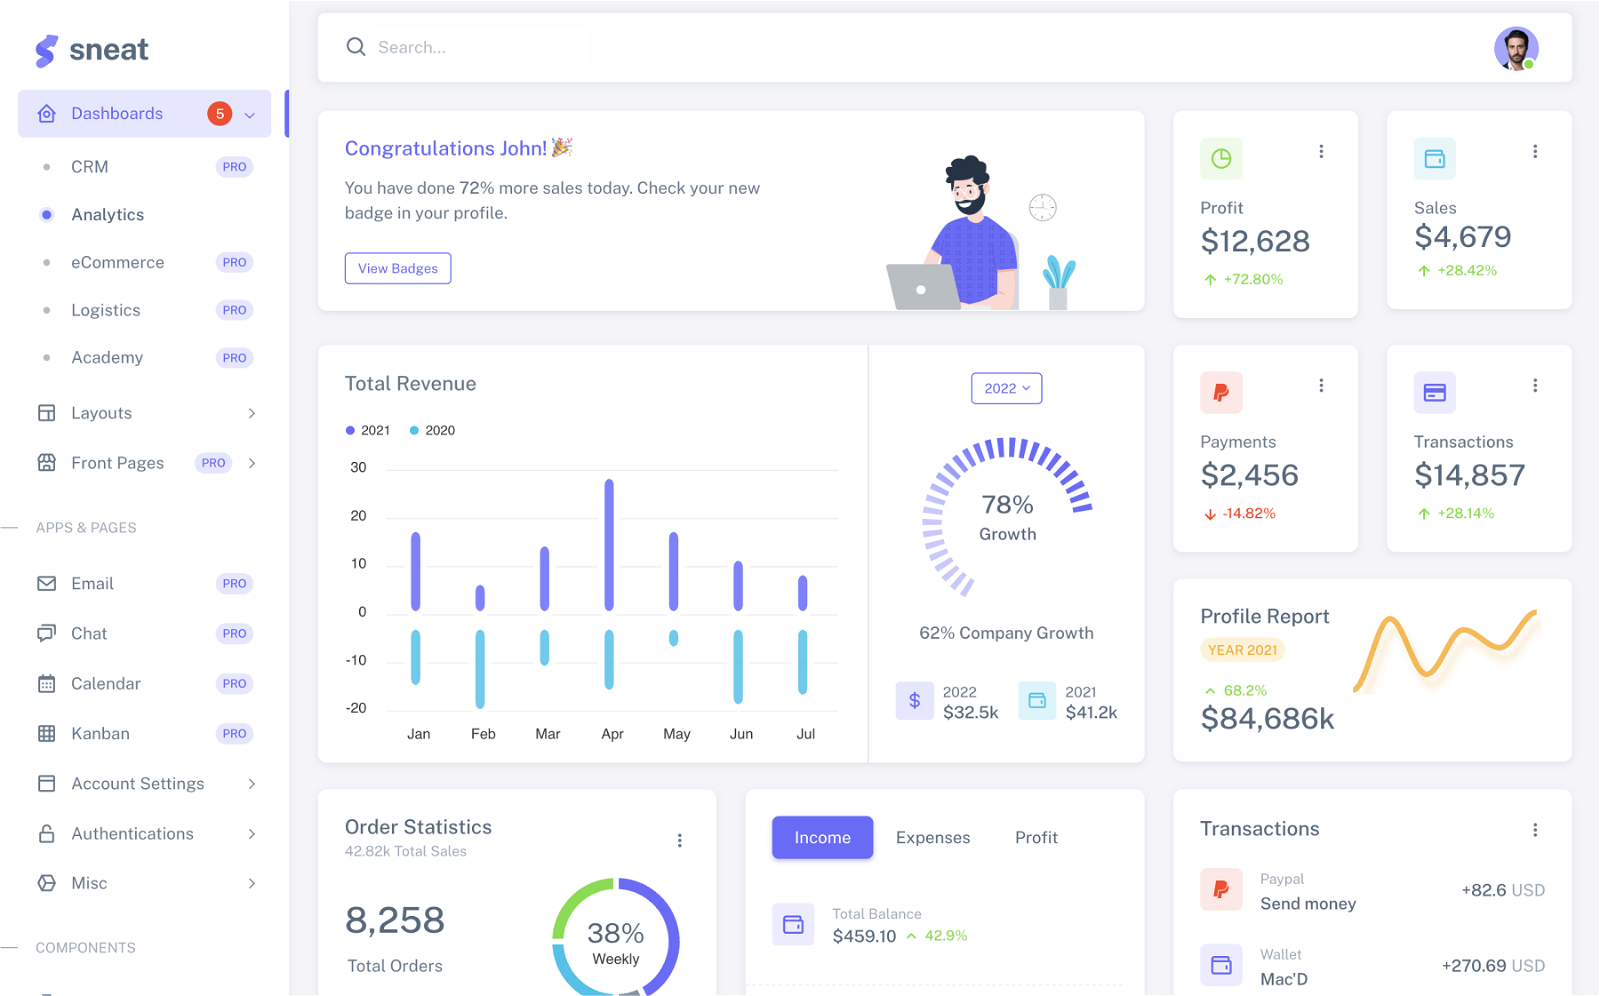 sneat dashboard free bootstrap